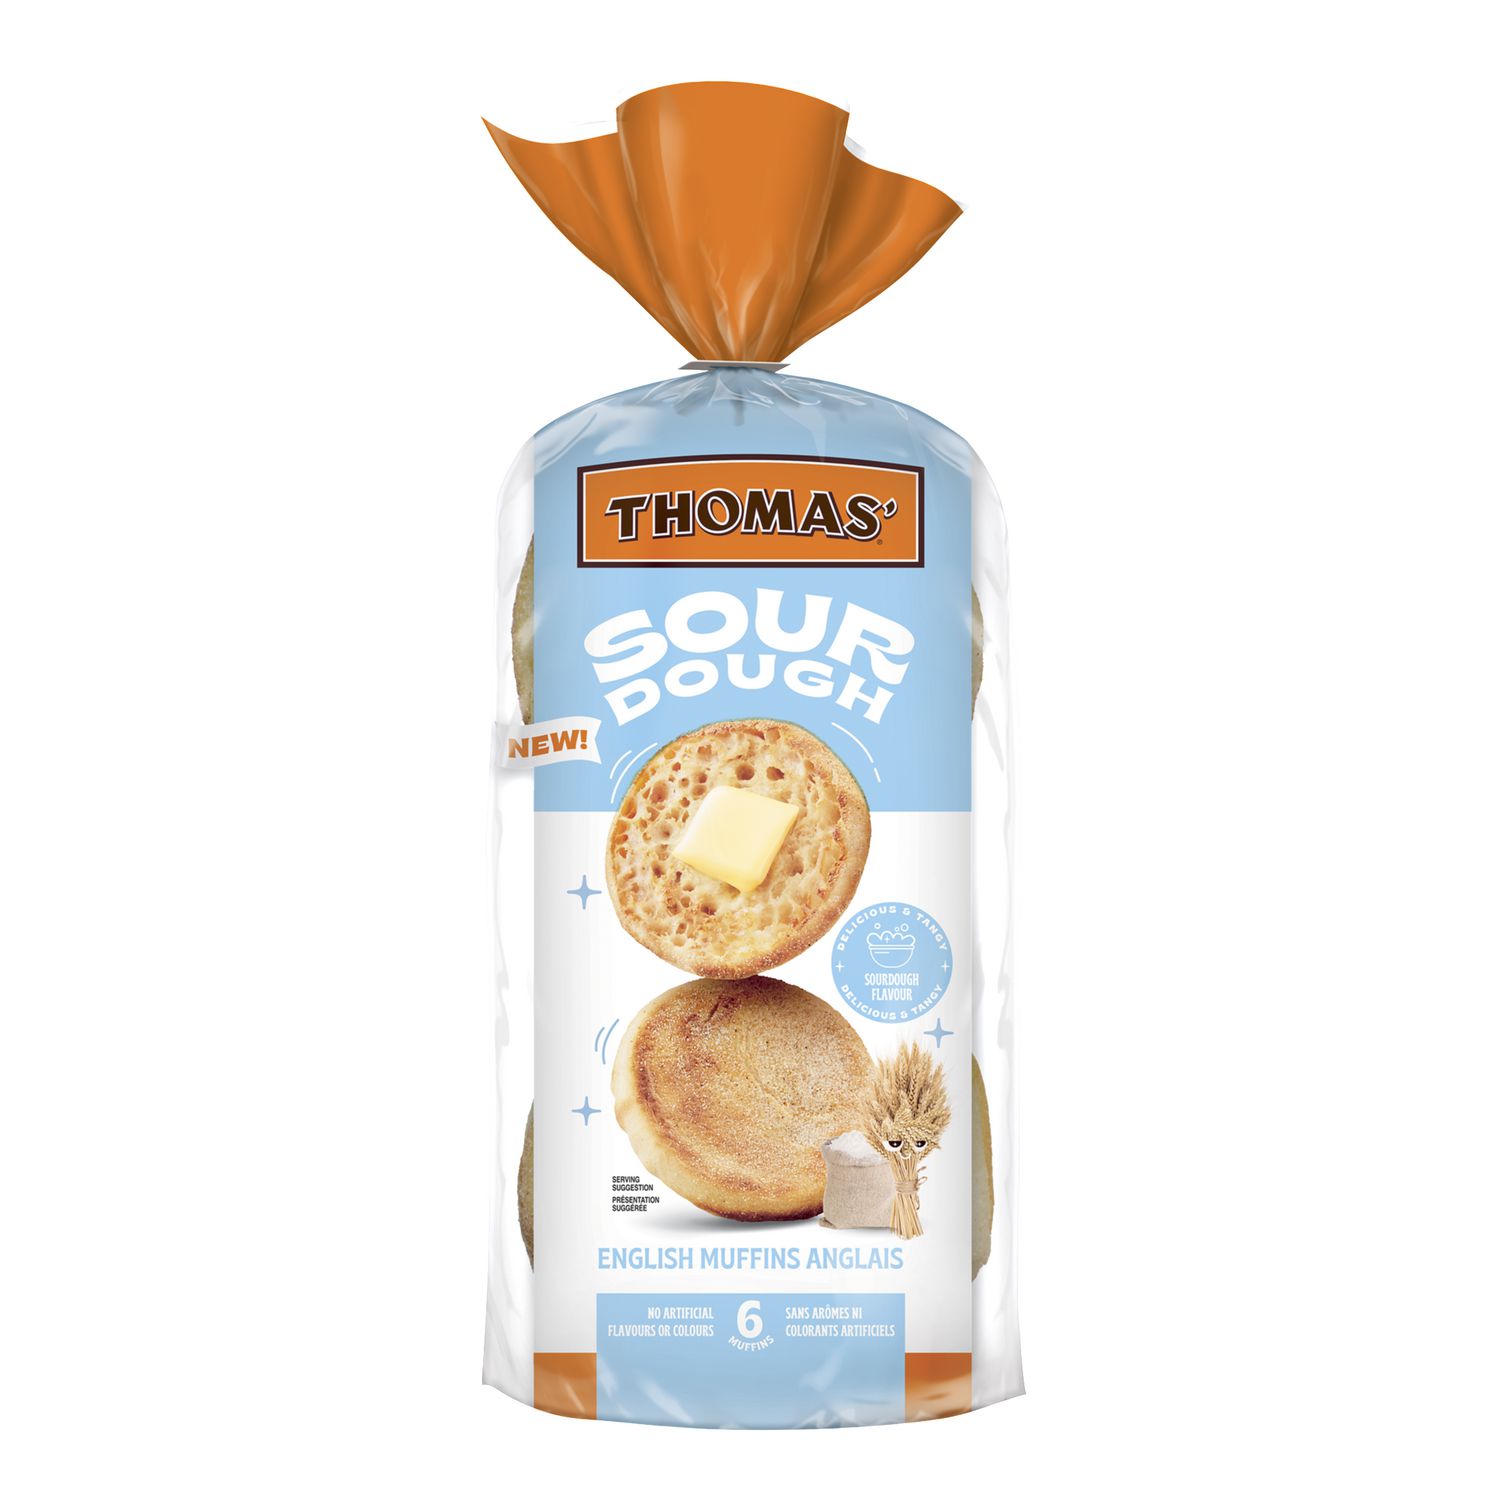 Thomas® Sourdough Muffins, Pack of 6